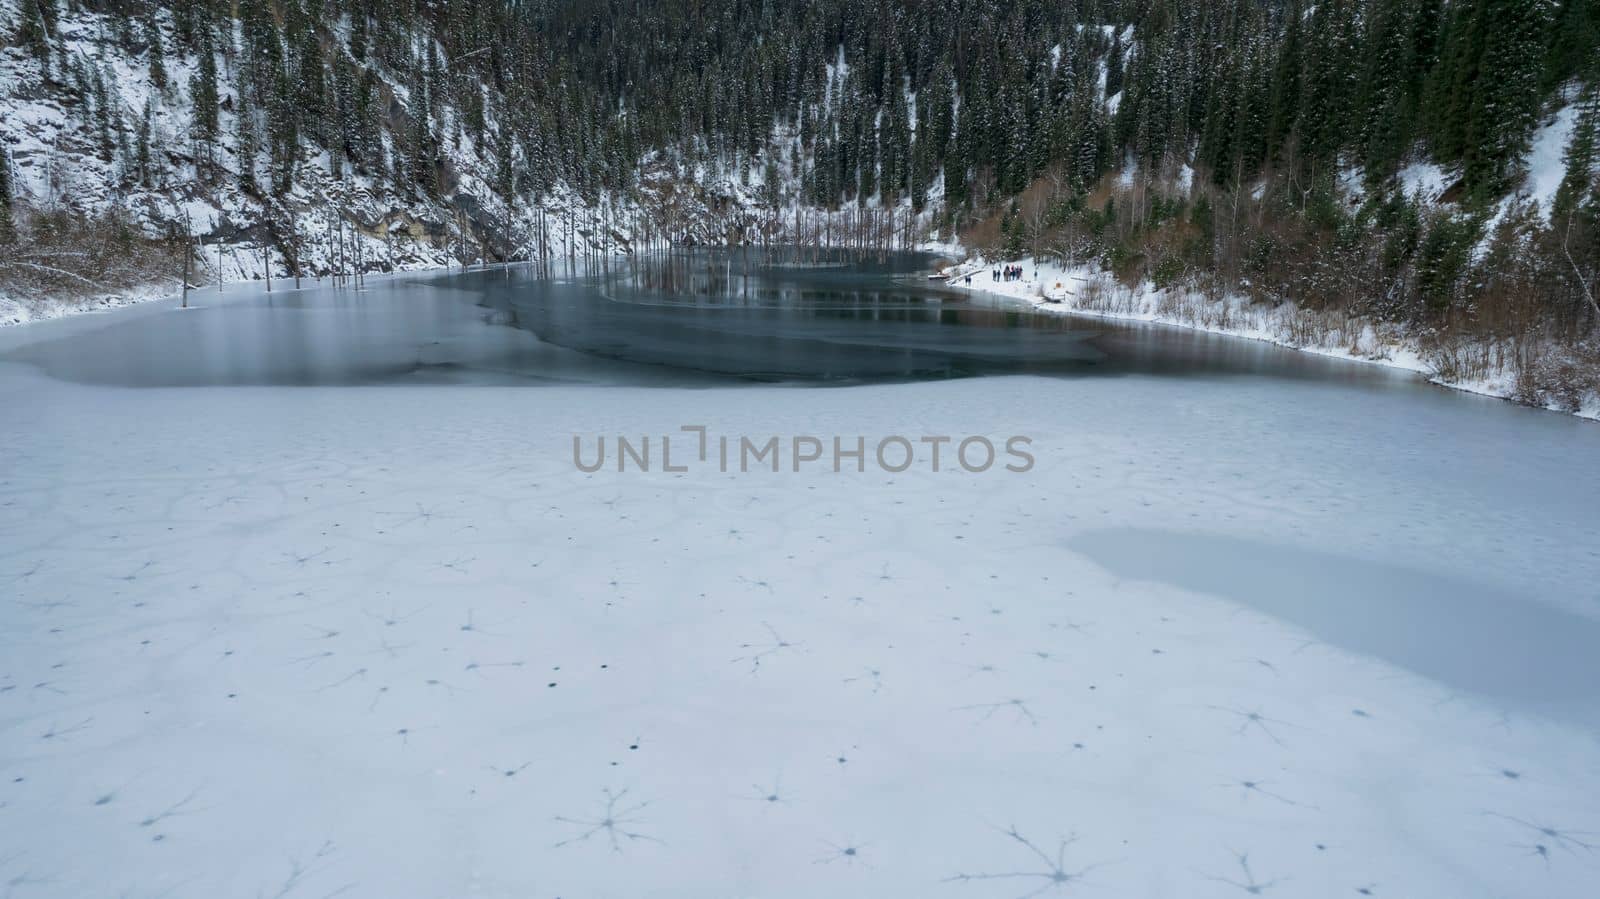 Unusual ice patterns on the mountain lake of Kaindy. Aerial view from a drone of a freezing lake, white ice with round streaks, dark water with a smooth surface. Mountains and coniferous winter forest